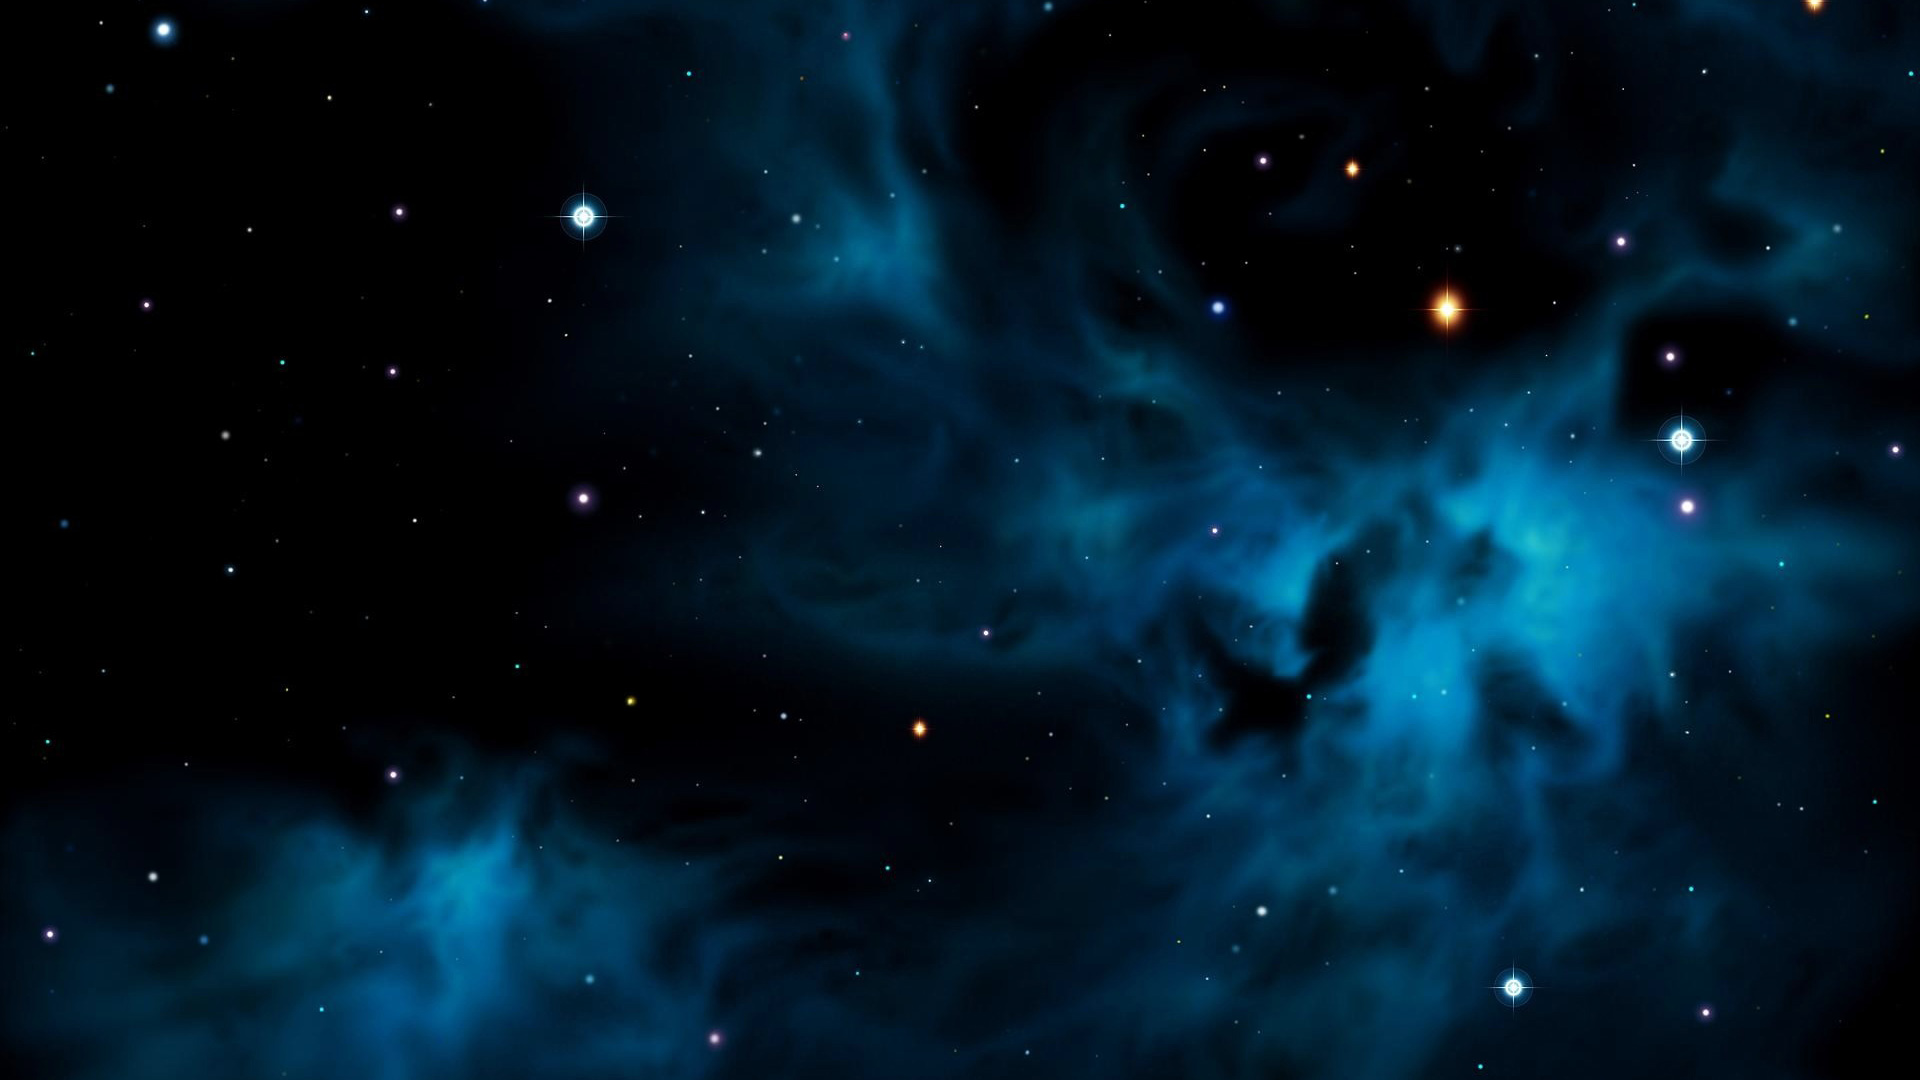 Blue And Light Fire Orange Stars And Clouds On Black Sky HD Space